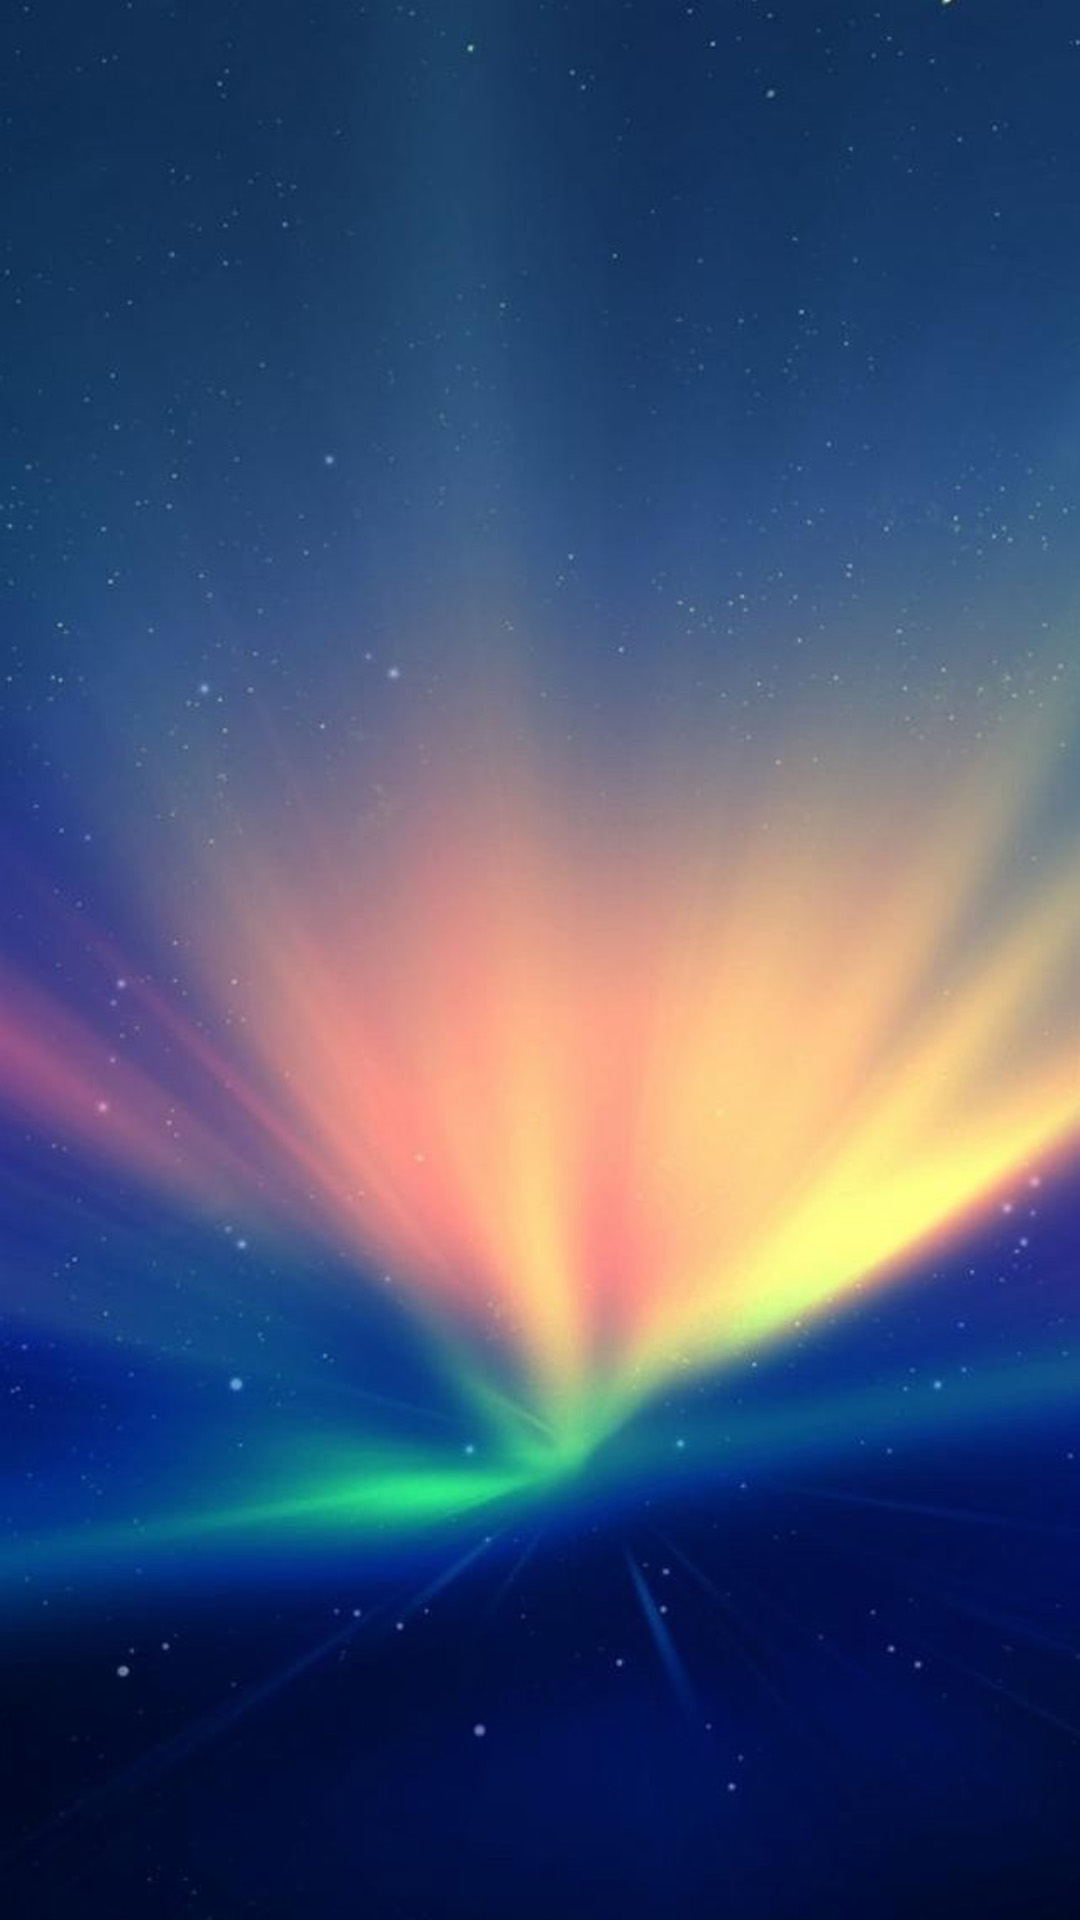 Abstract Htc One M8 Wallpaper